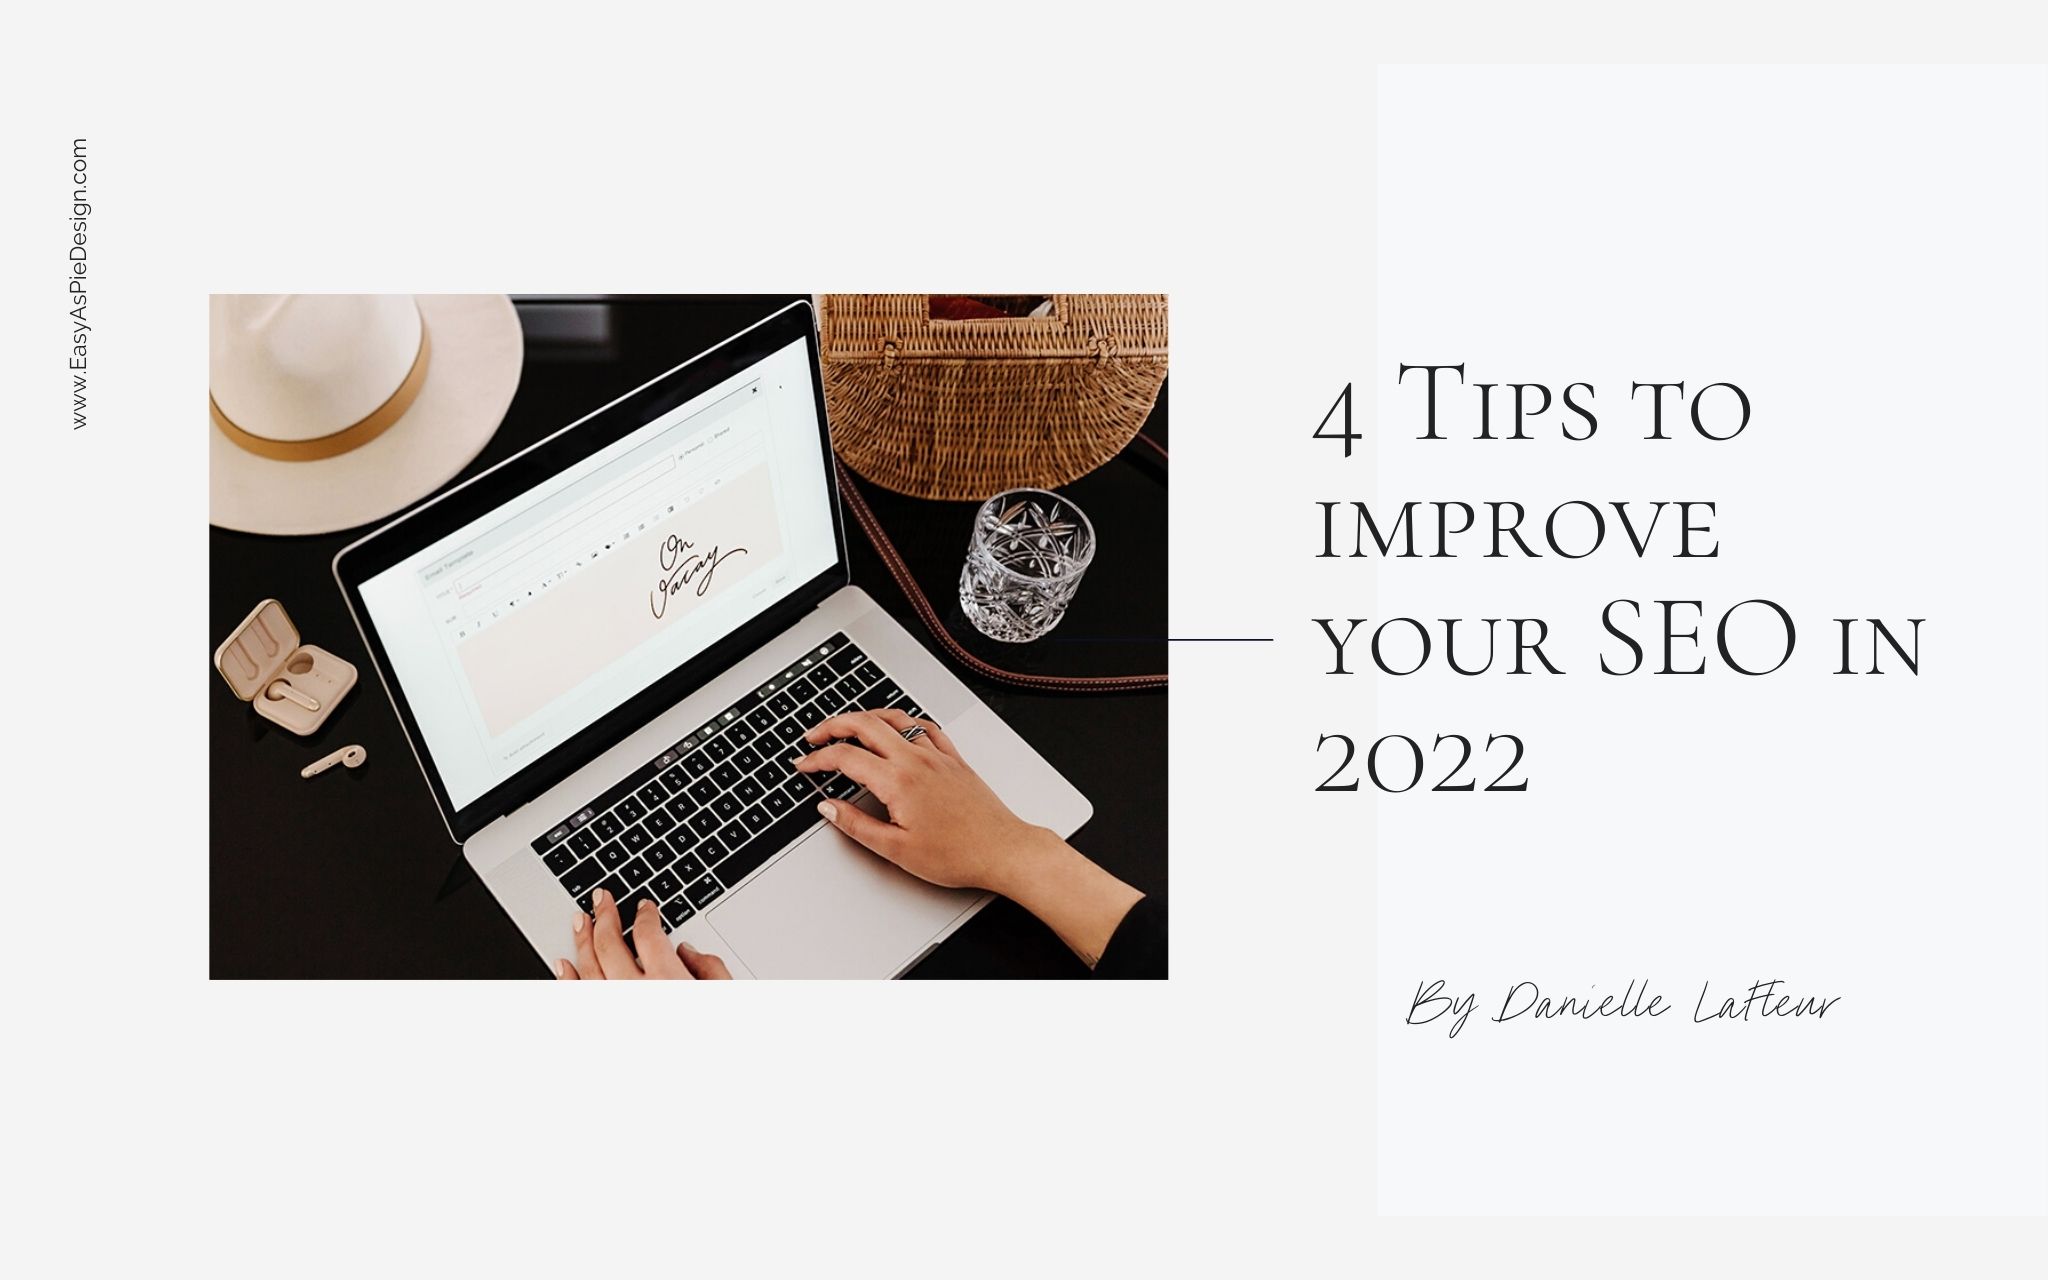 4 Top Tips on How to Improve SEO in 2022!